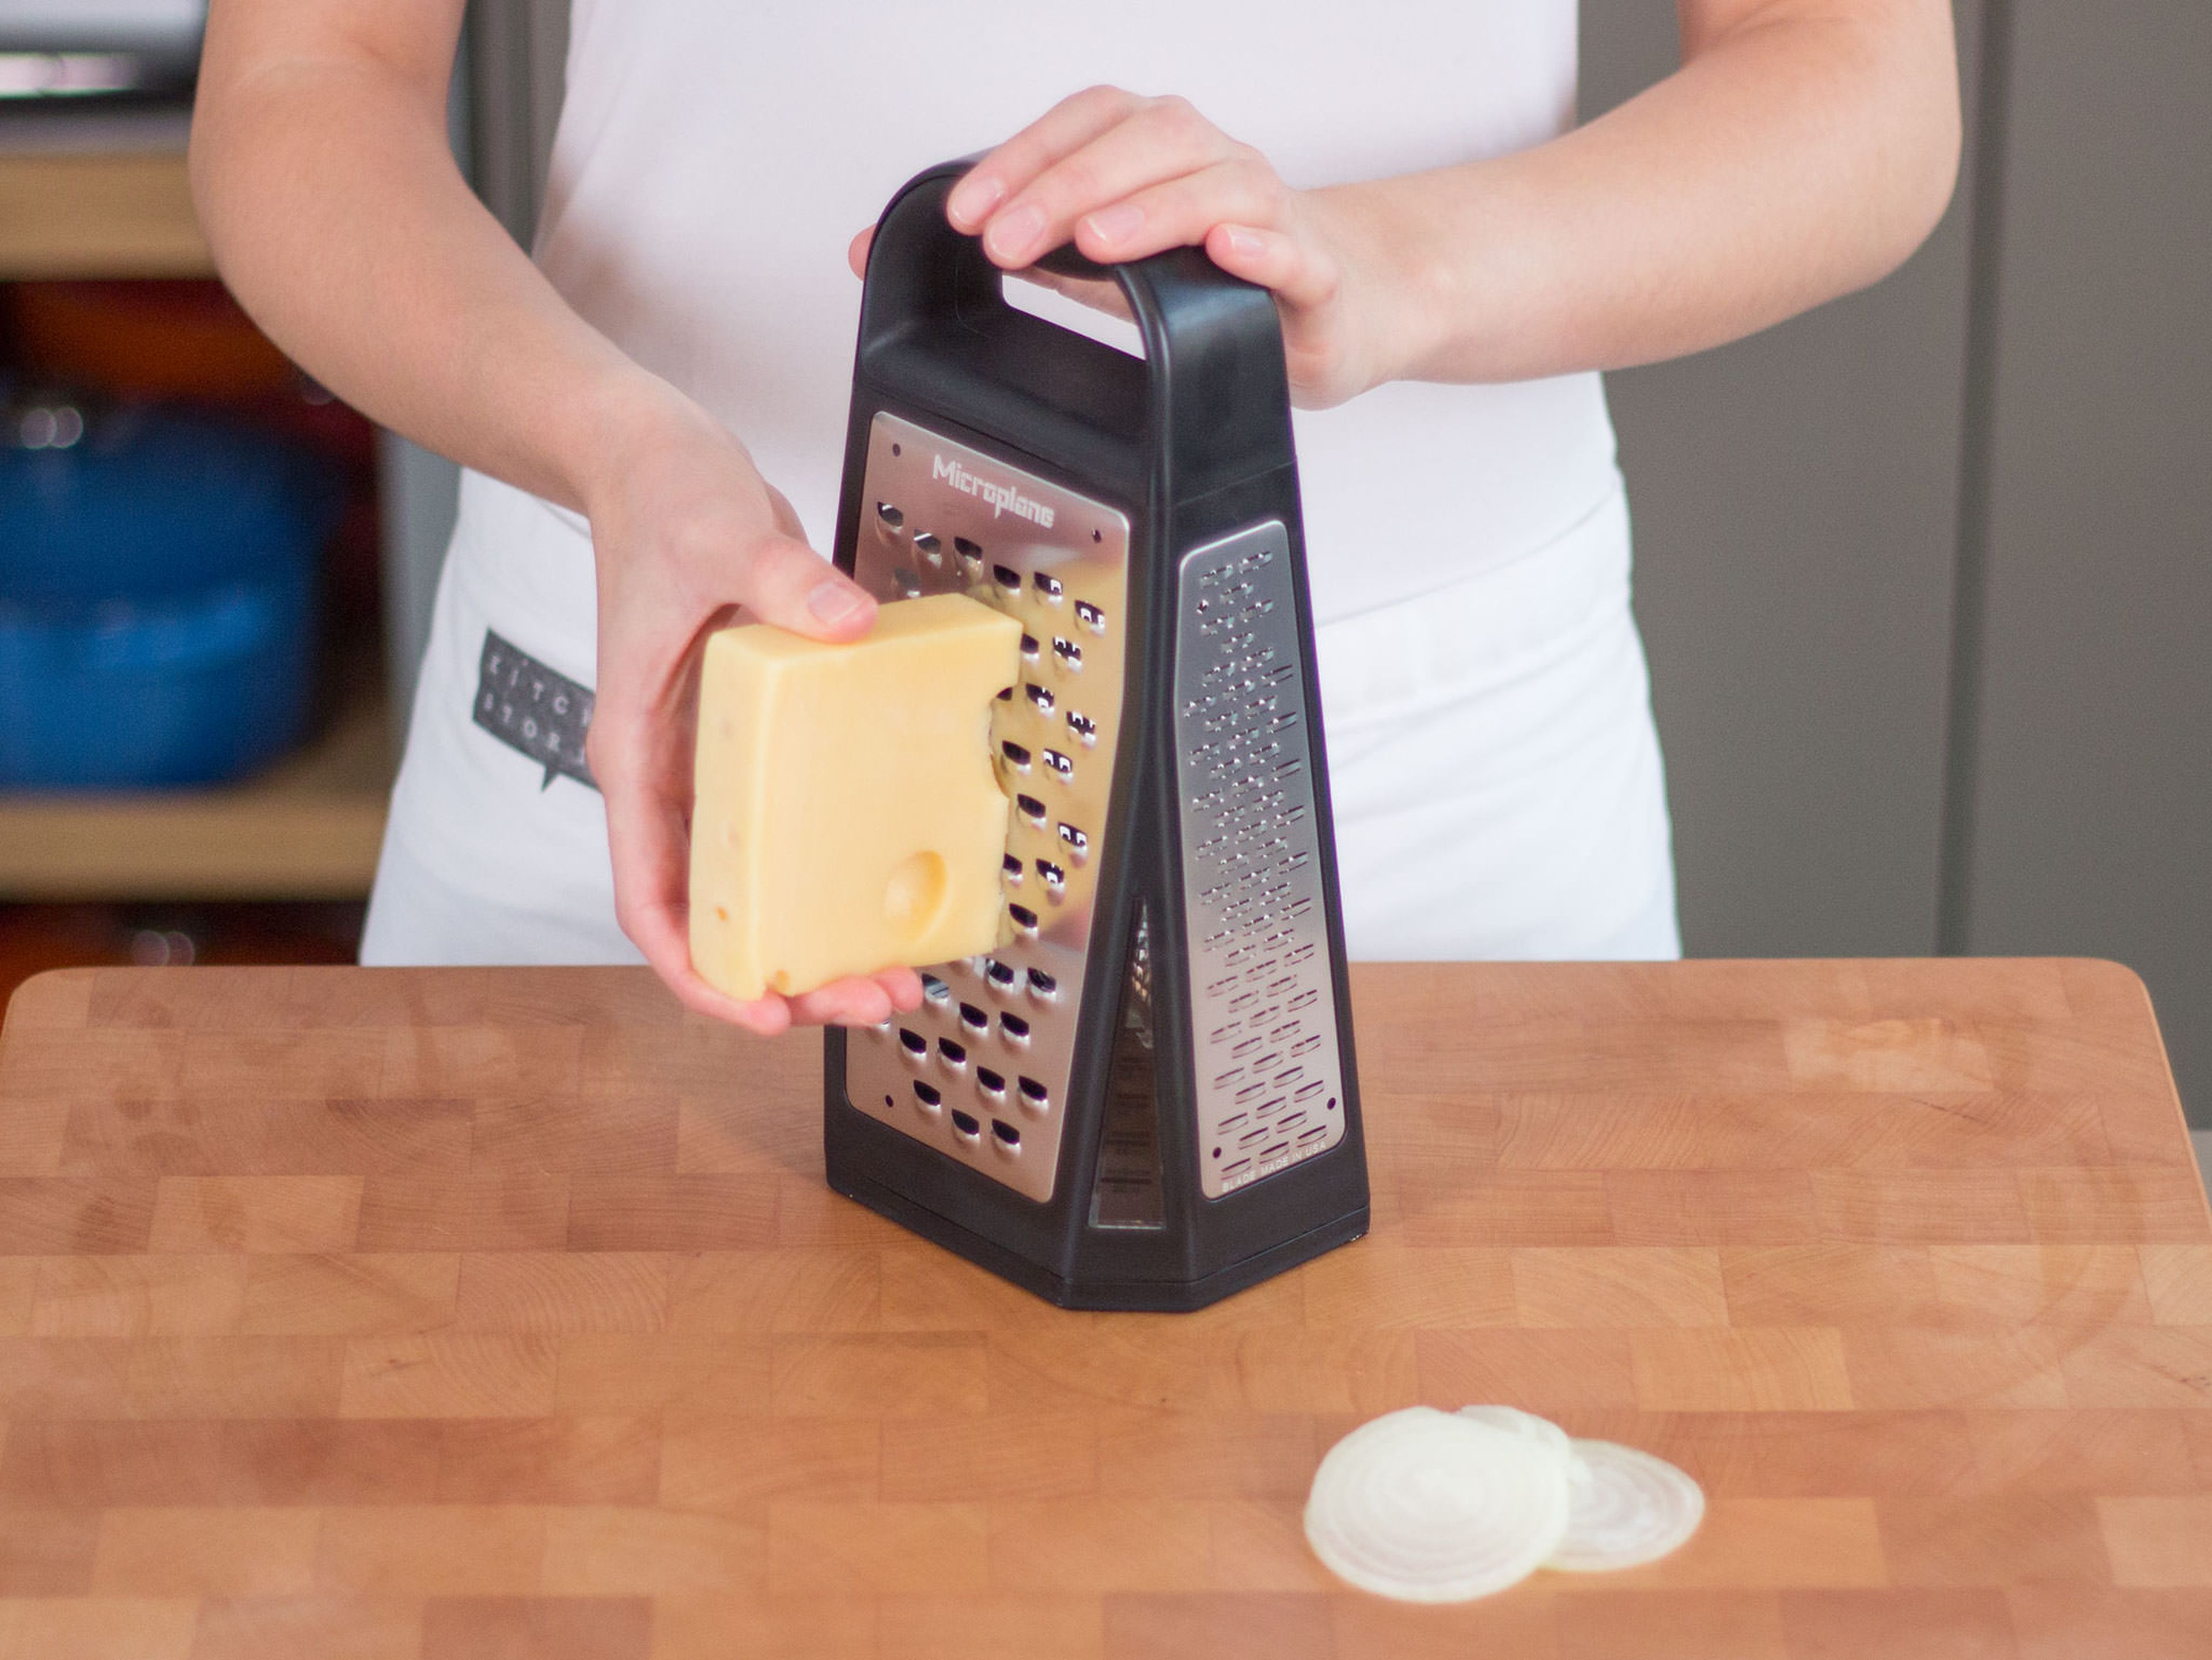 Cut onions into thin rings. Roughly chop parsley. Shred cheese with a box grater, using the side with largest holes.